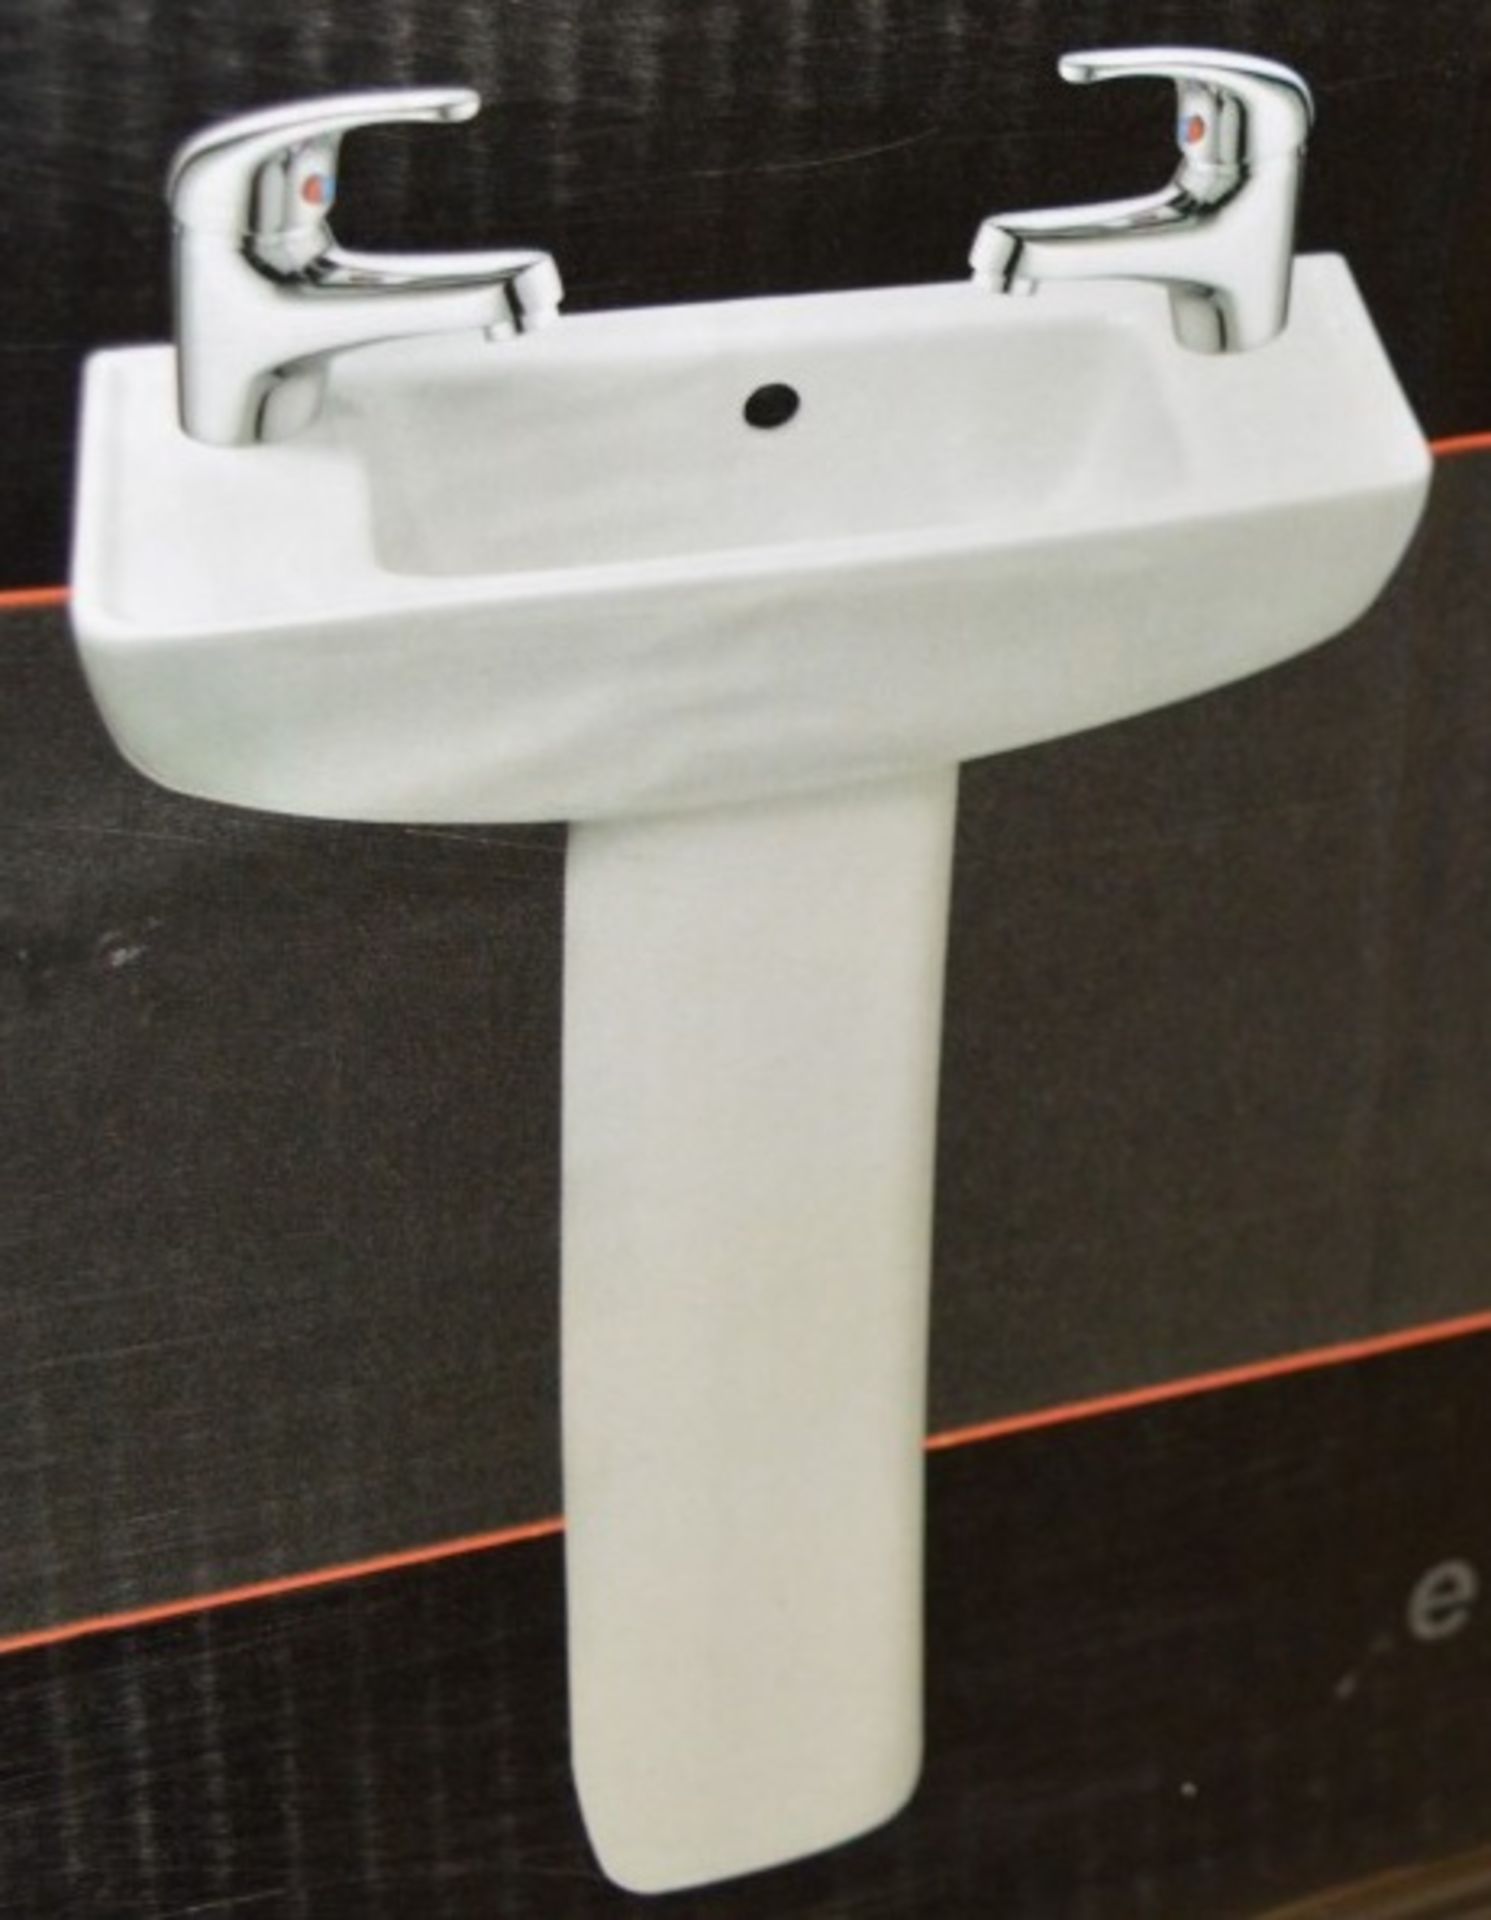 1 x Xpress Spectrum Short Projection 2 Tap Hole Cloakroom Sink Basin With Pedestal - 250mm Short - Image 4 of 4